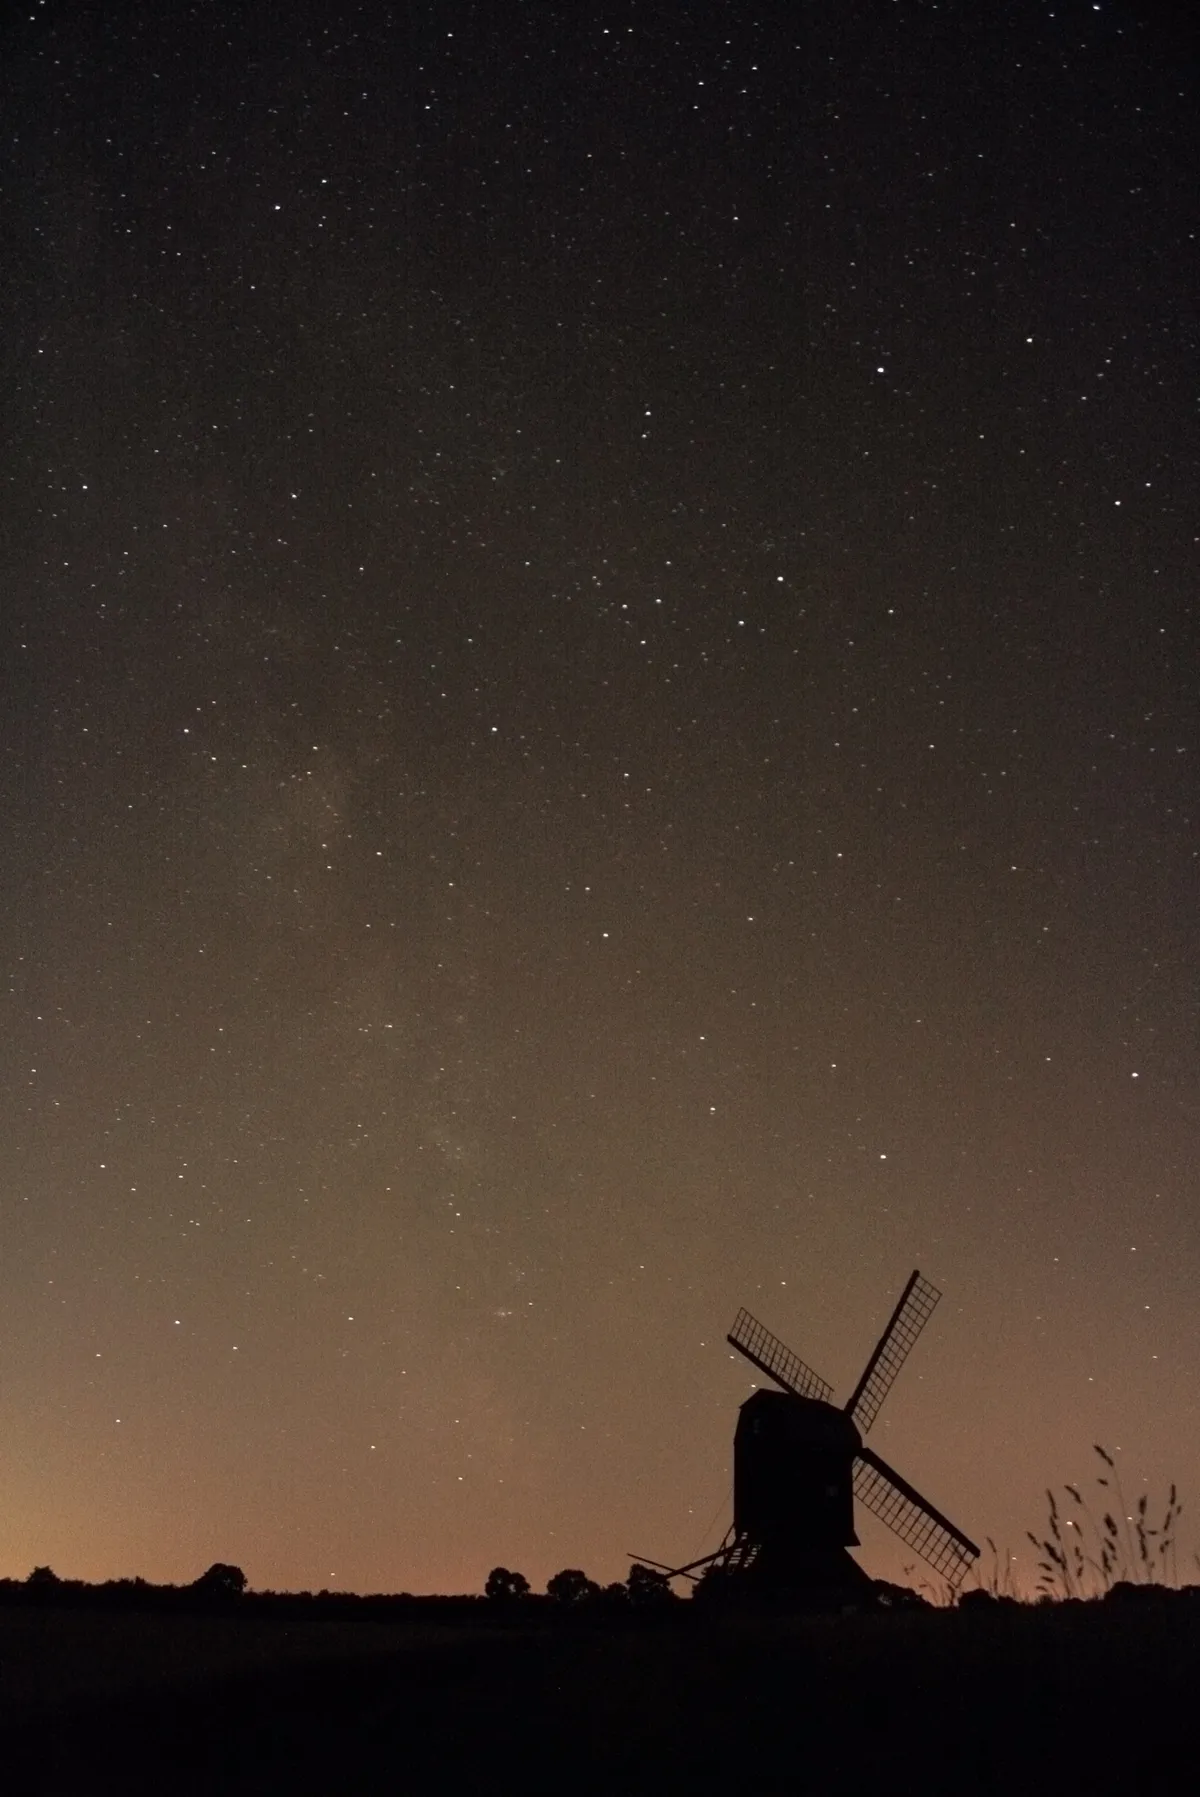 Windmill and the Milky Way by Luke Oliver, Stevington, UK. Equipment: Canon 1000D, 18mm lens @ f/3.5, Baader Skyglow filter.